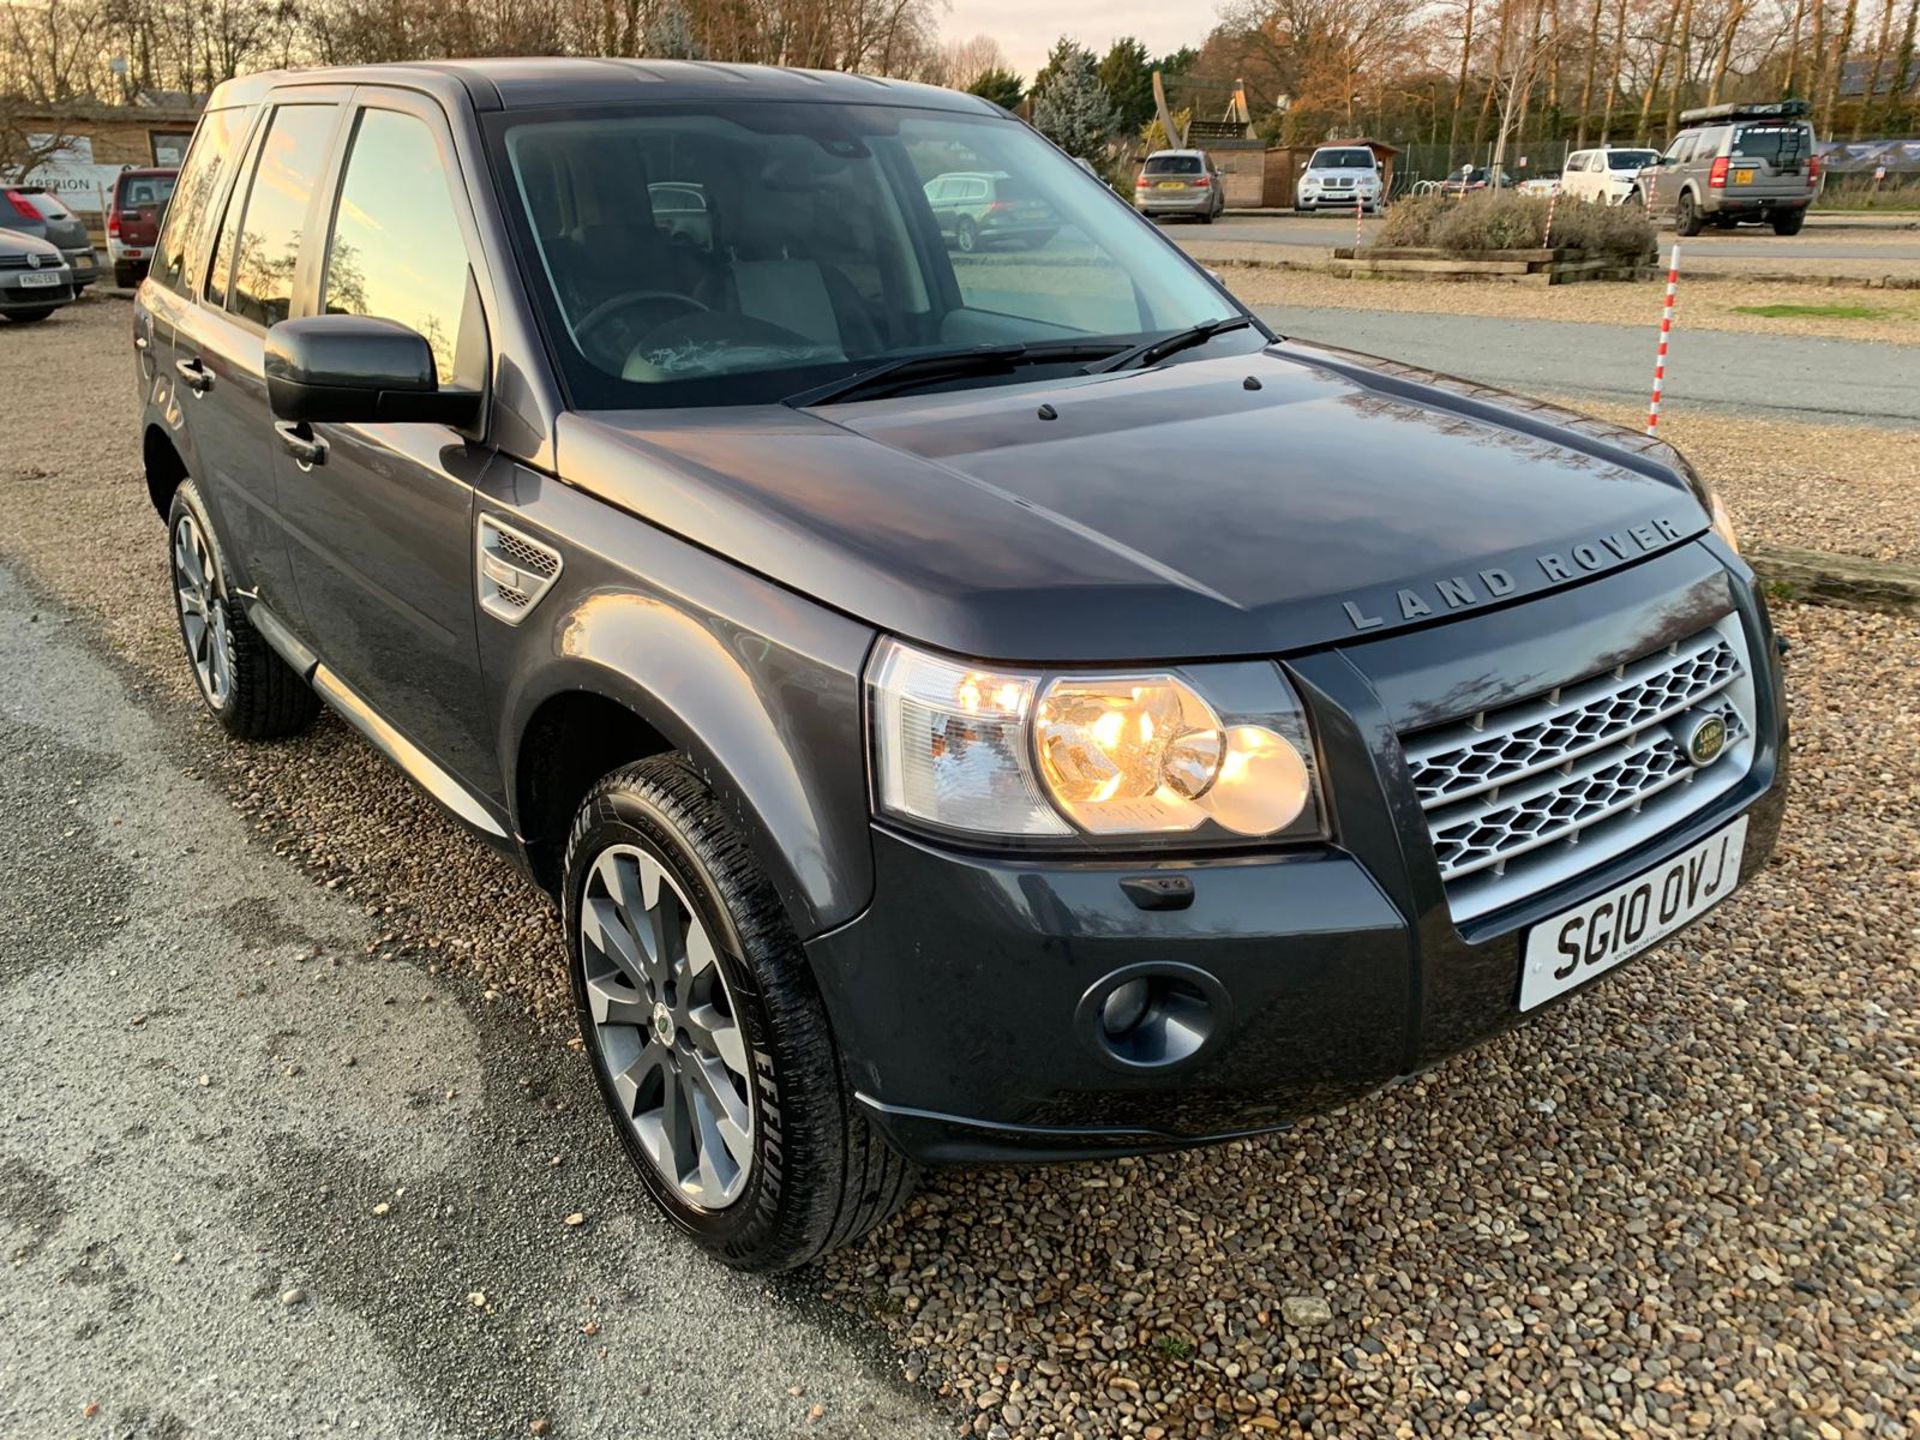 2010/10 REG LAND ROVER FREELANDER SPORT LE TD4 2.2 DIESEL AUTO 4X4, SHOWING 2 FORMER KEEPERS - Image 2 of 13